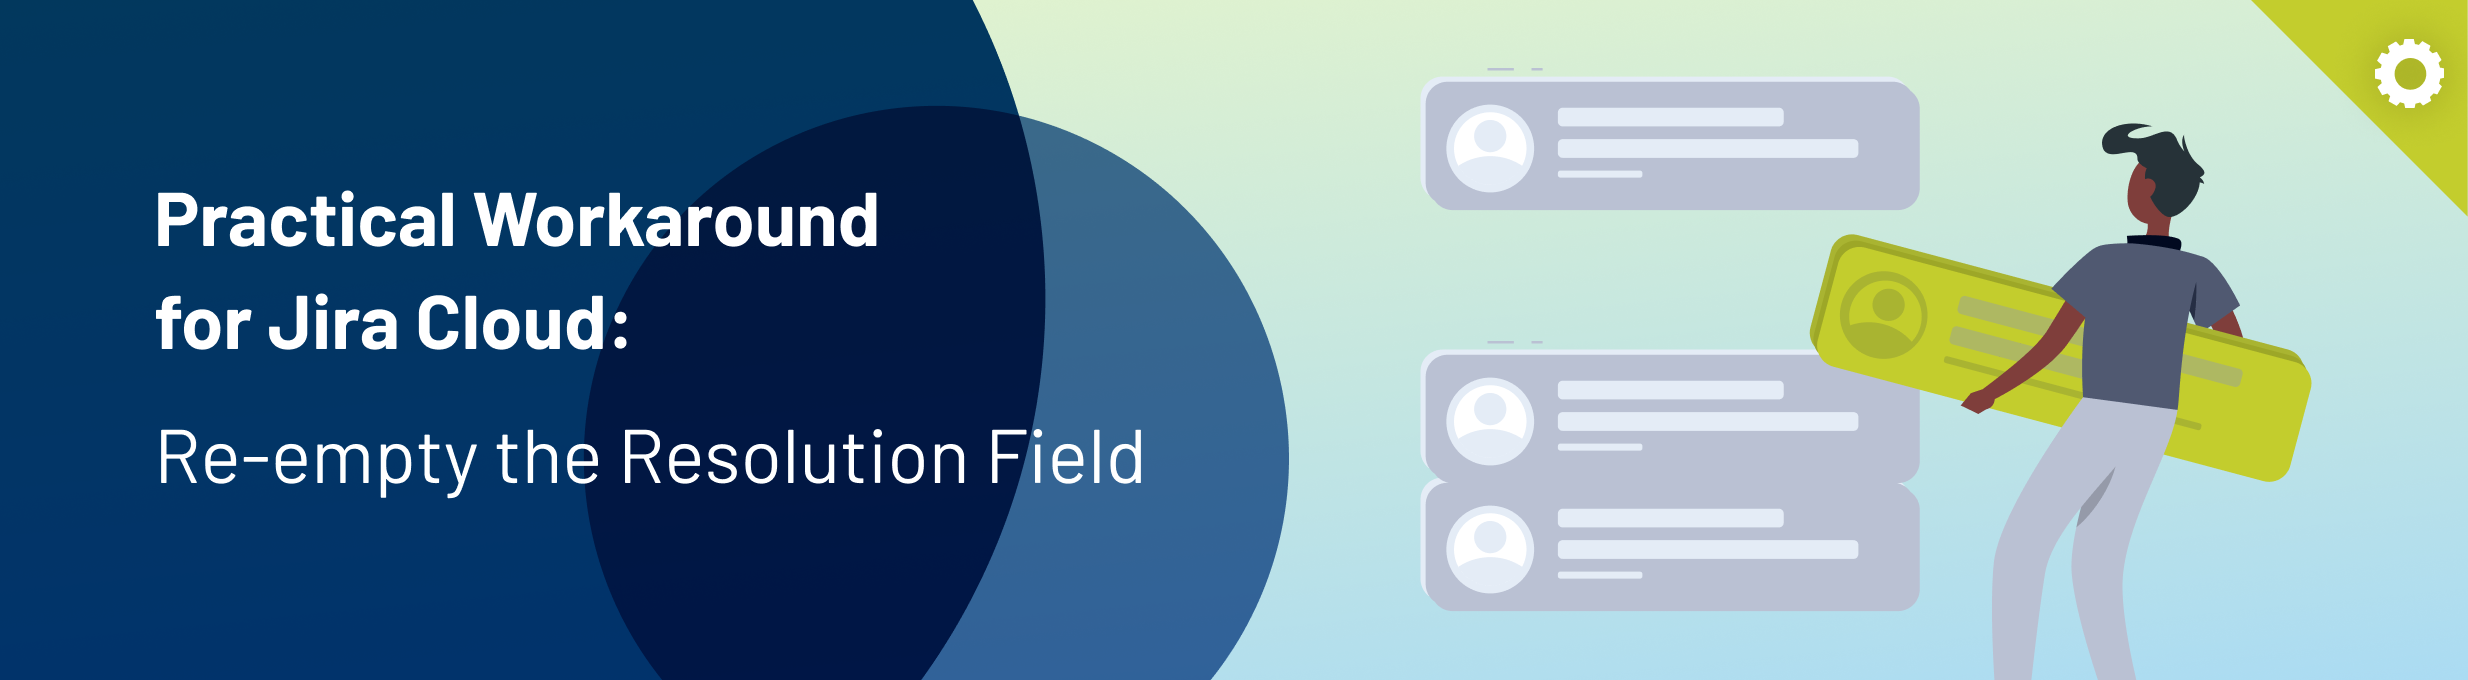 Practical Workaround for Jira Cloud: Re-empty the Resolution Field - banner